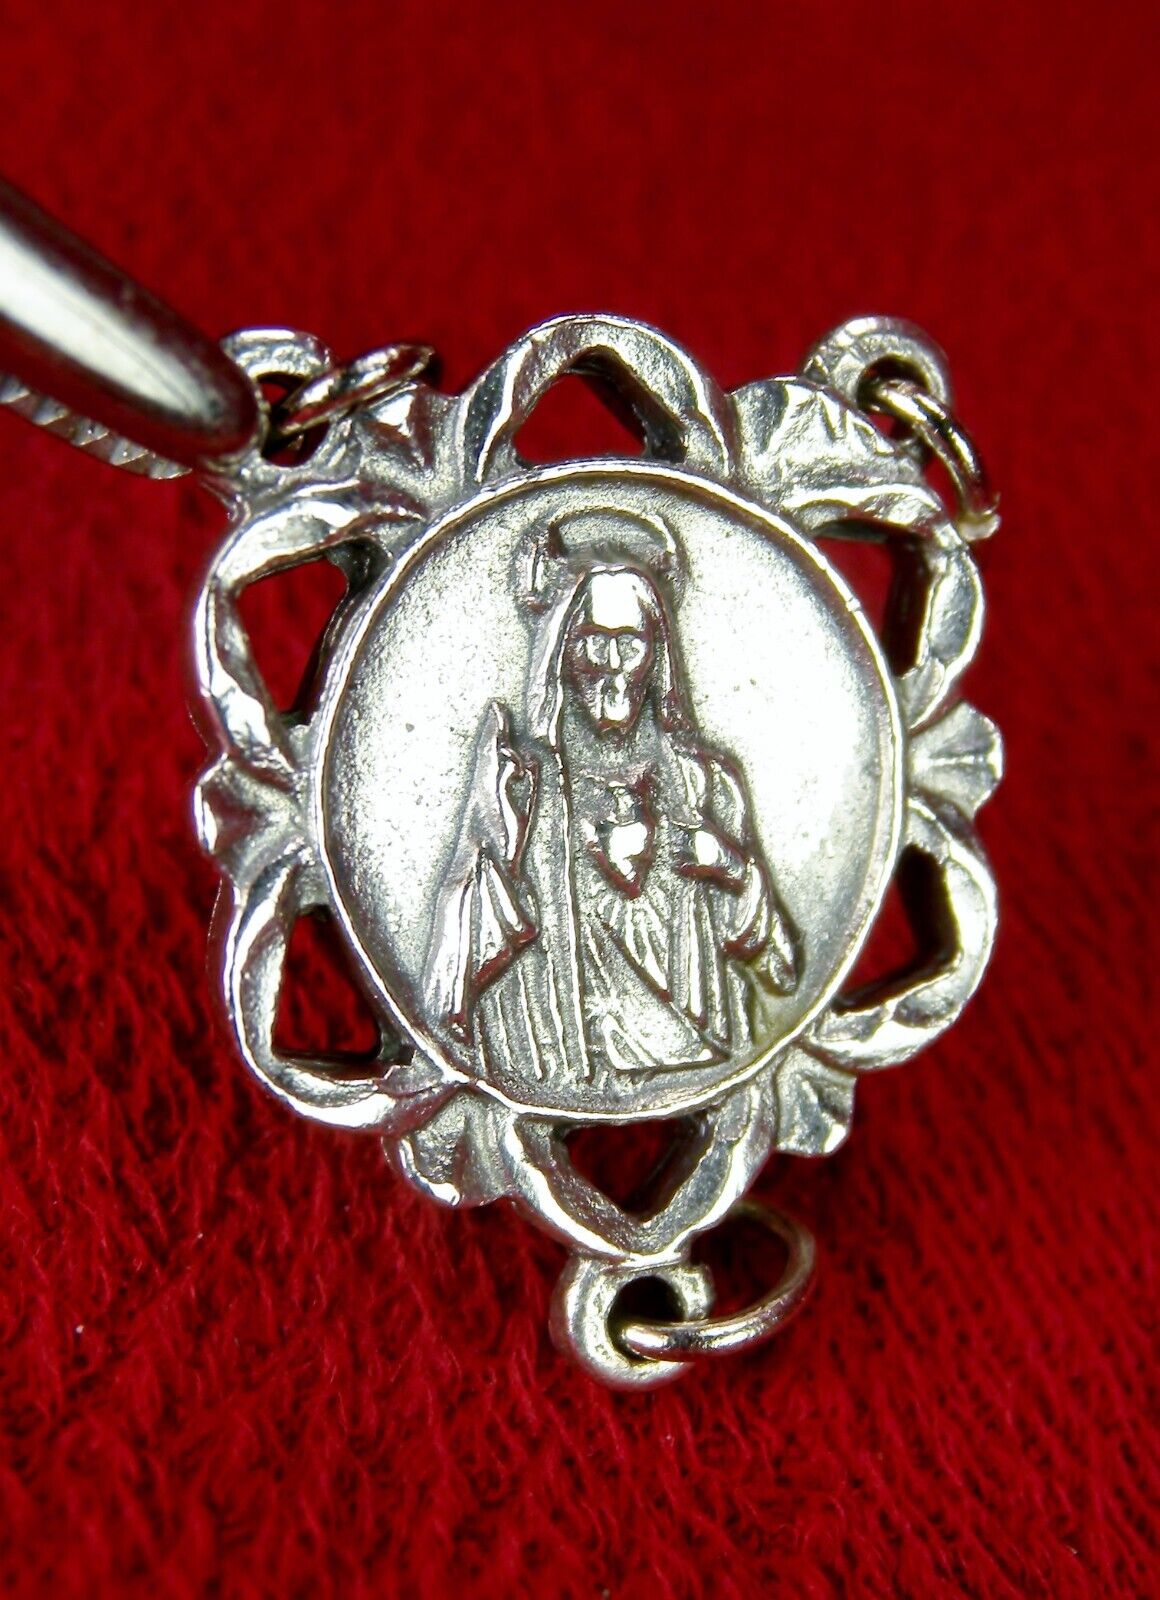 Carmelite Nuns MALCO Sterling Silver Centerpiece Scapular Medal from Her Rosary